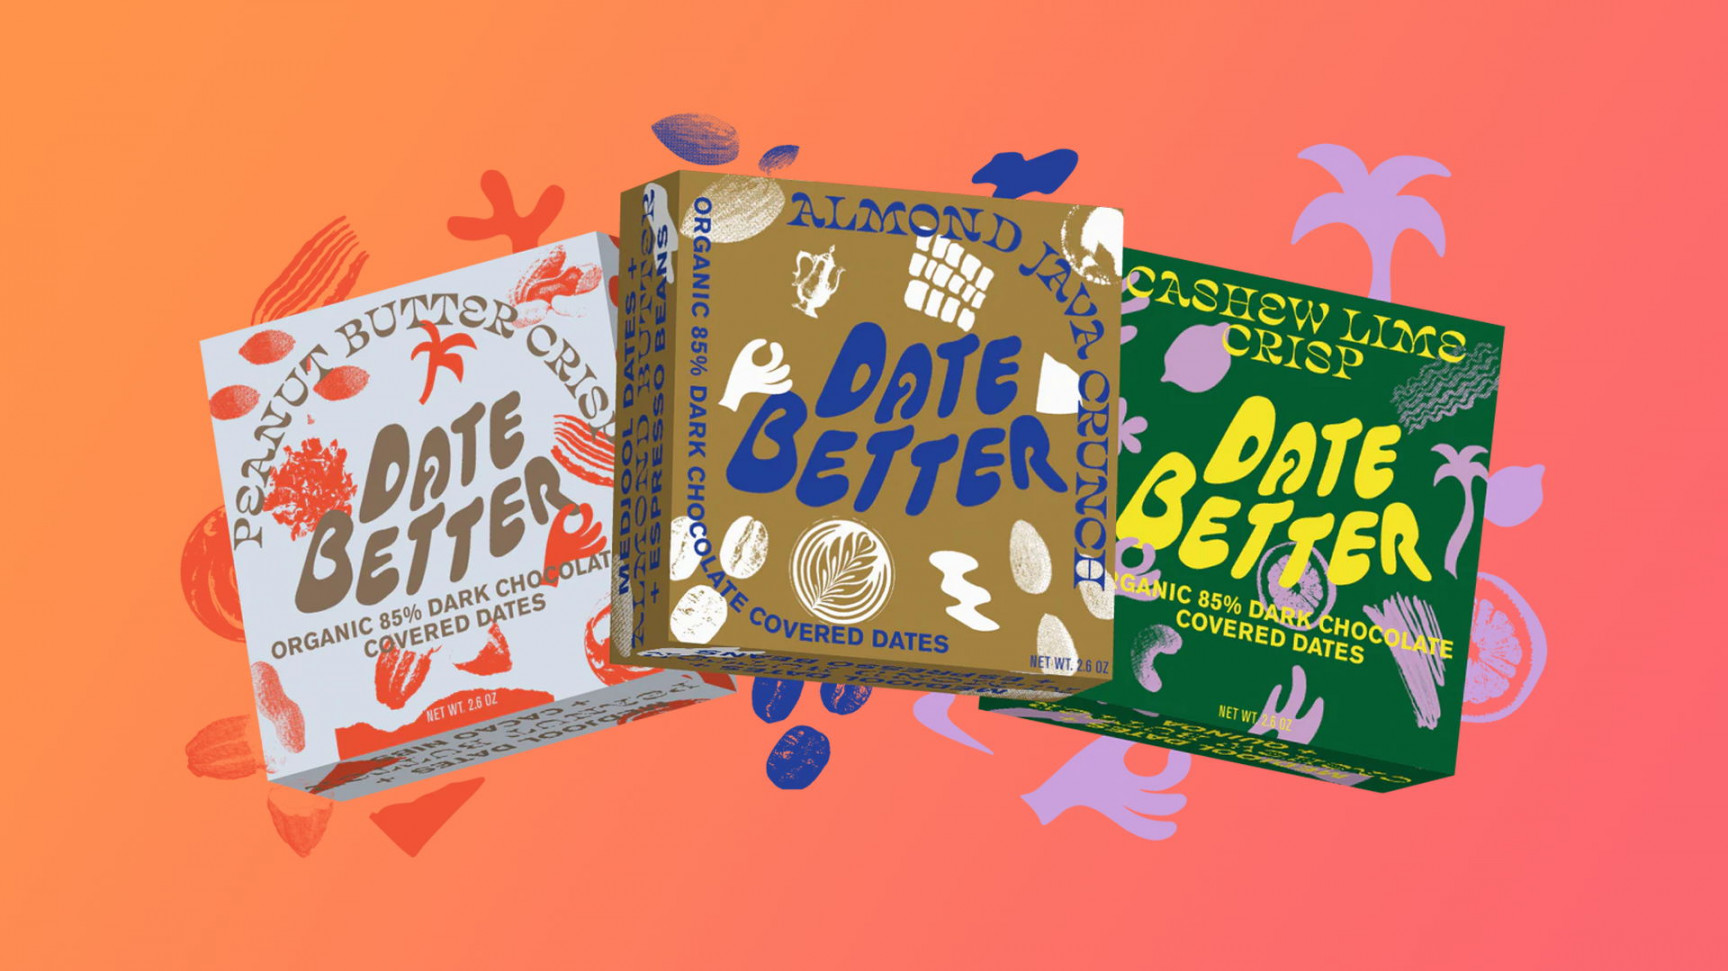 Julianna Bach-Designed Date Better Is as Sweet as the Brand